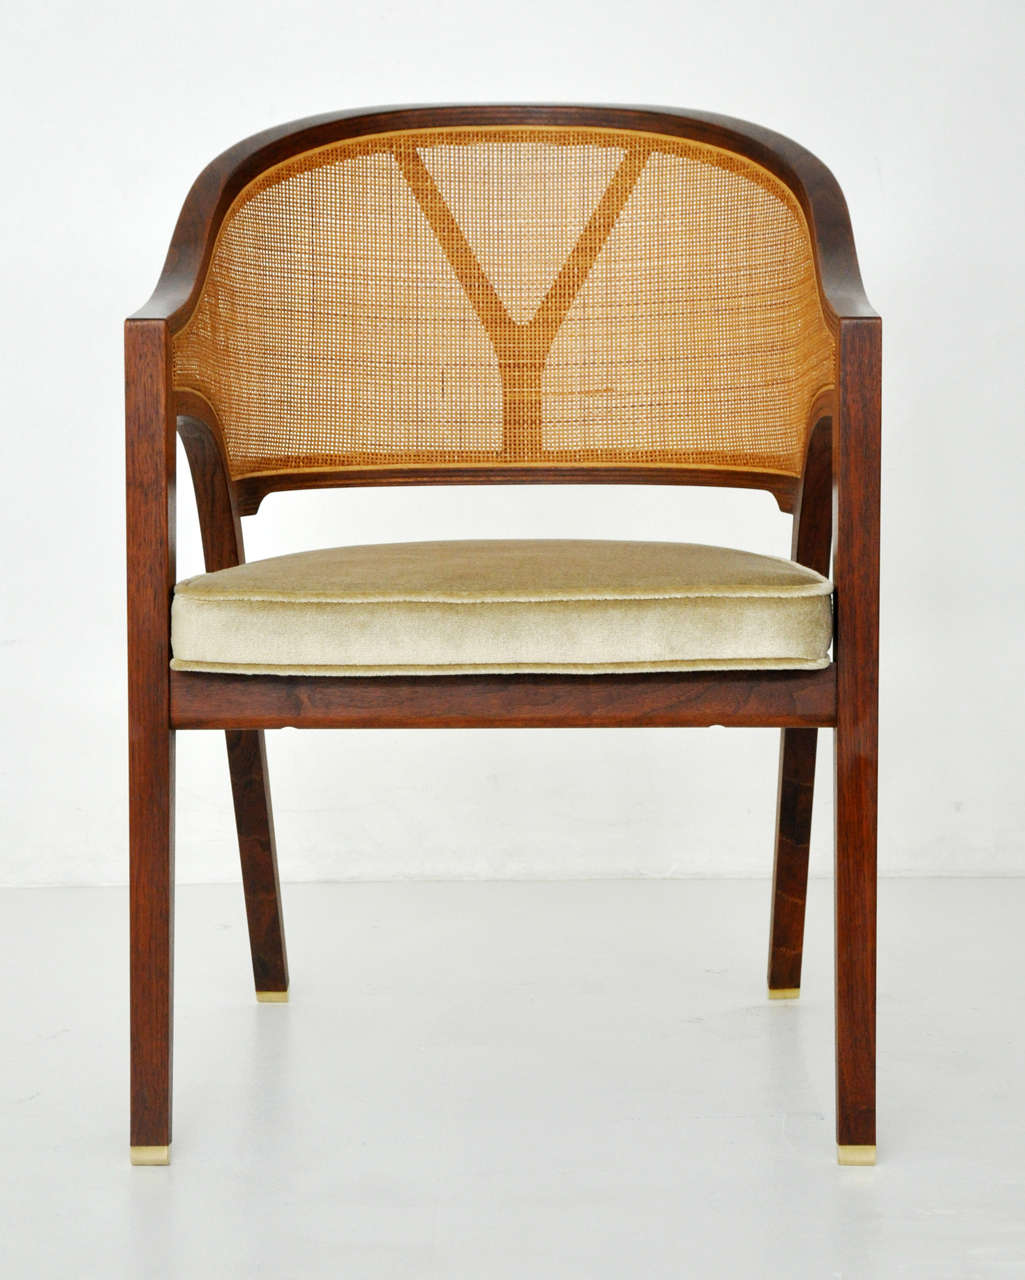 Pair of armchairs designed by Edward Wormley for Dunbar. Walnut frames with new mohair upholstery.